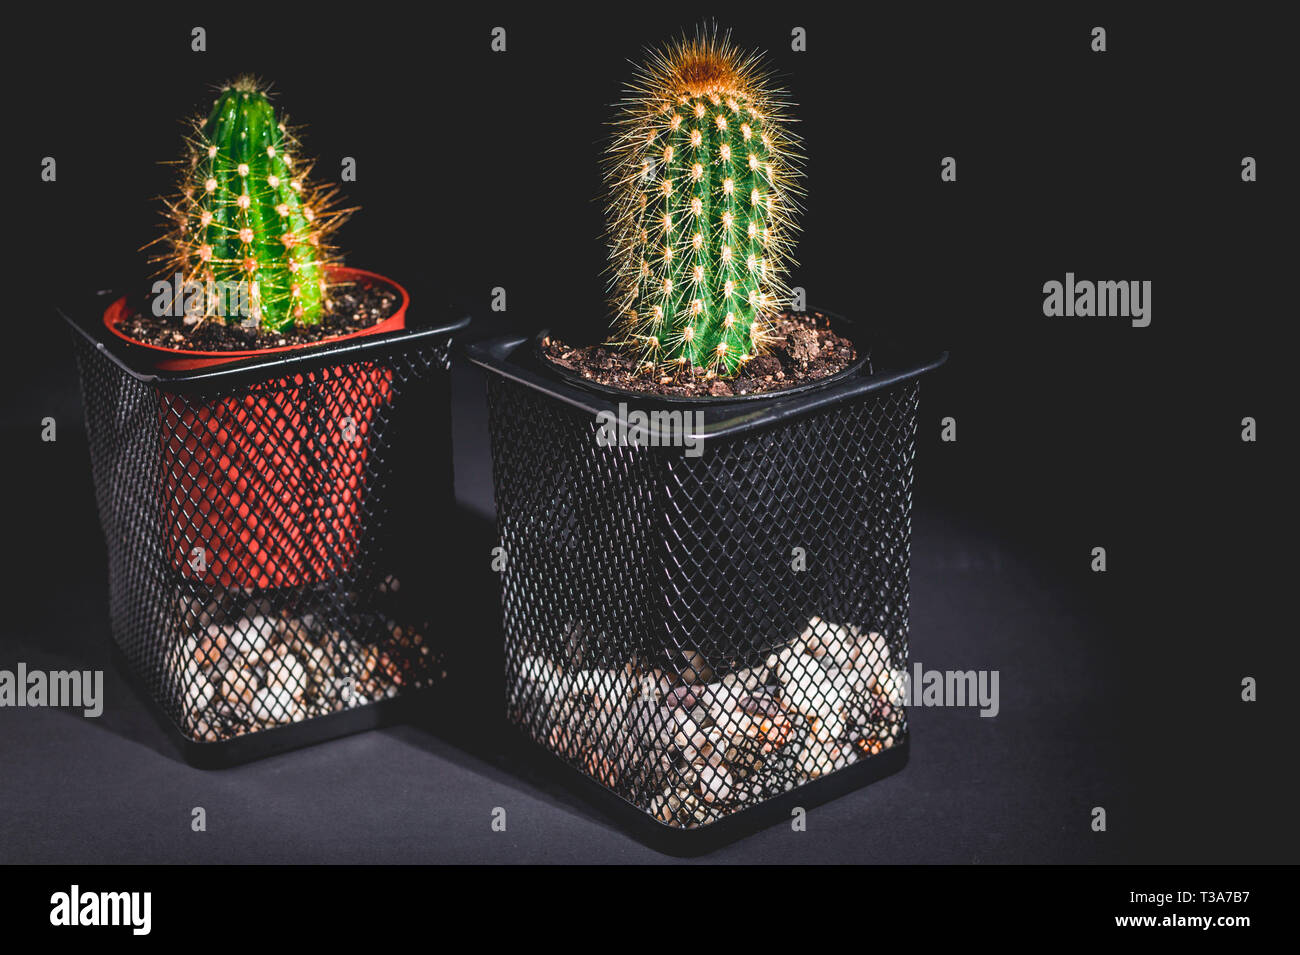 Two cactus in a decorative pot on a dark background. Low key lighting Stock Photo